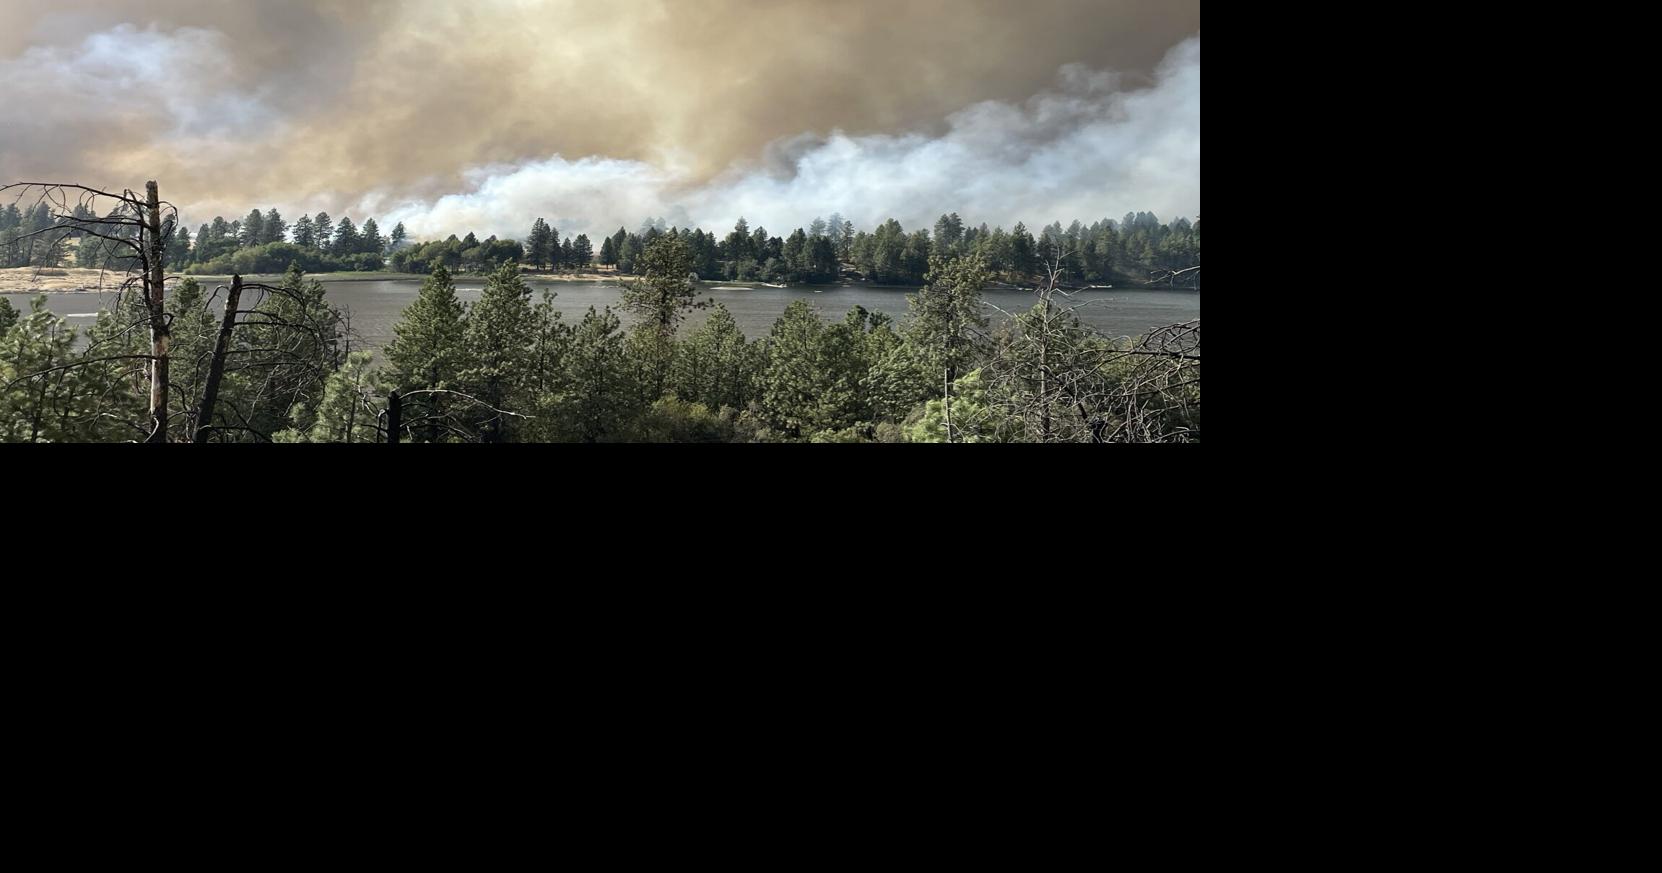 Disaster Assistance Center opening Friday for Gray, Oregon Road Fire victims